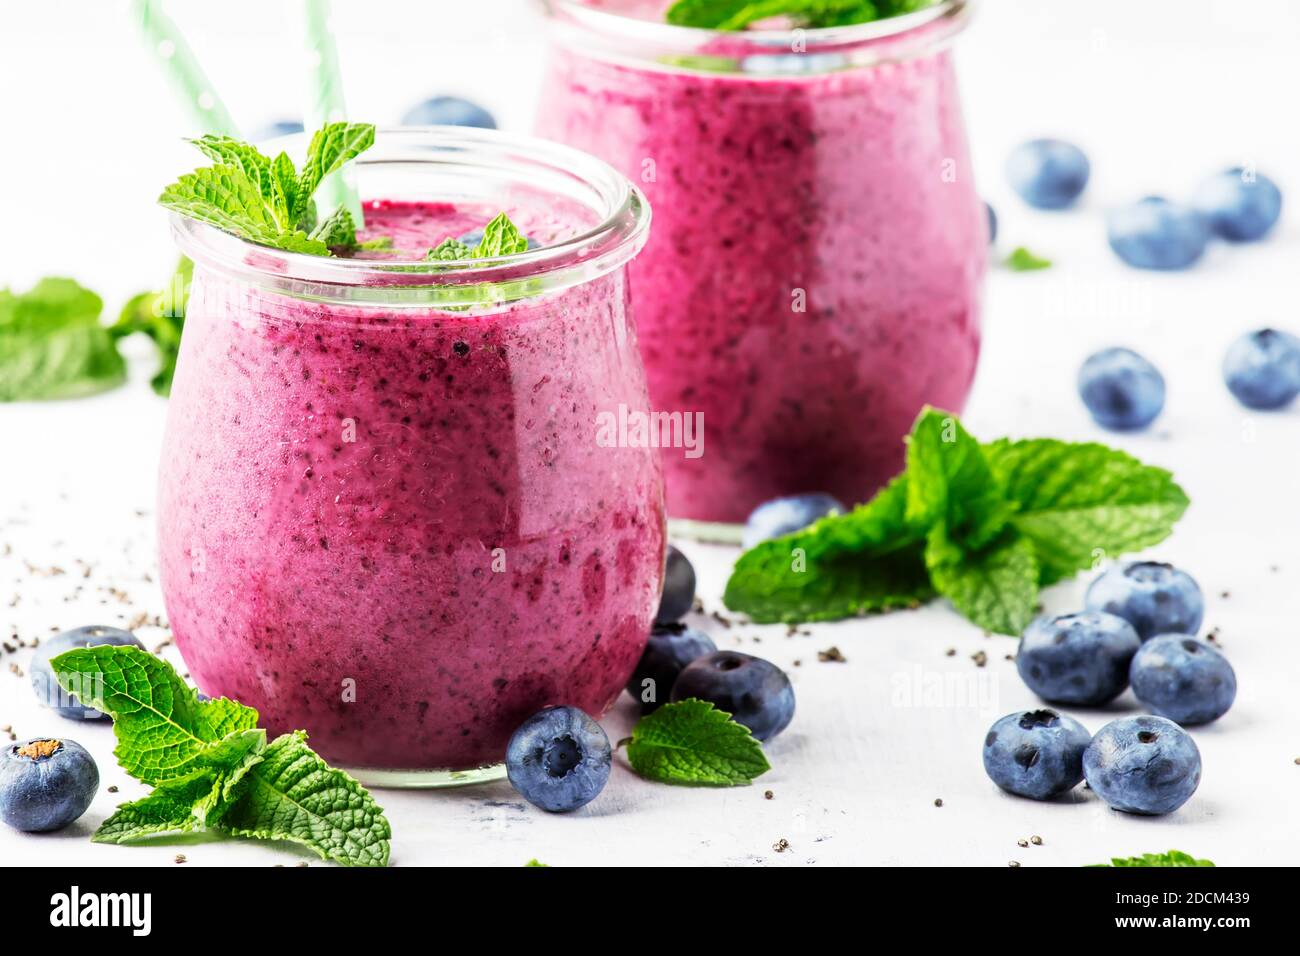 Purple homemade yogurt or smoothie with blueberries, chia seeds and mint leaves in glass jars on gray background, selective focus Stock Photo